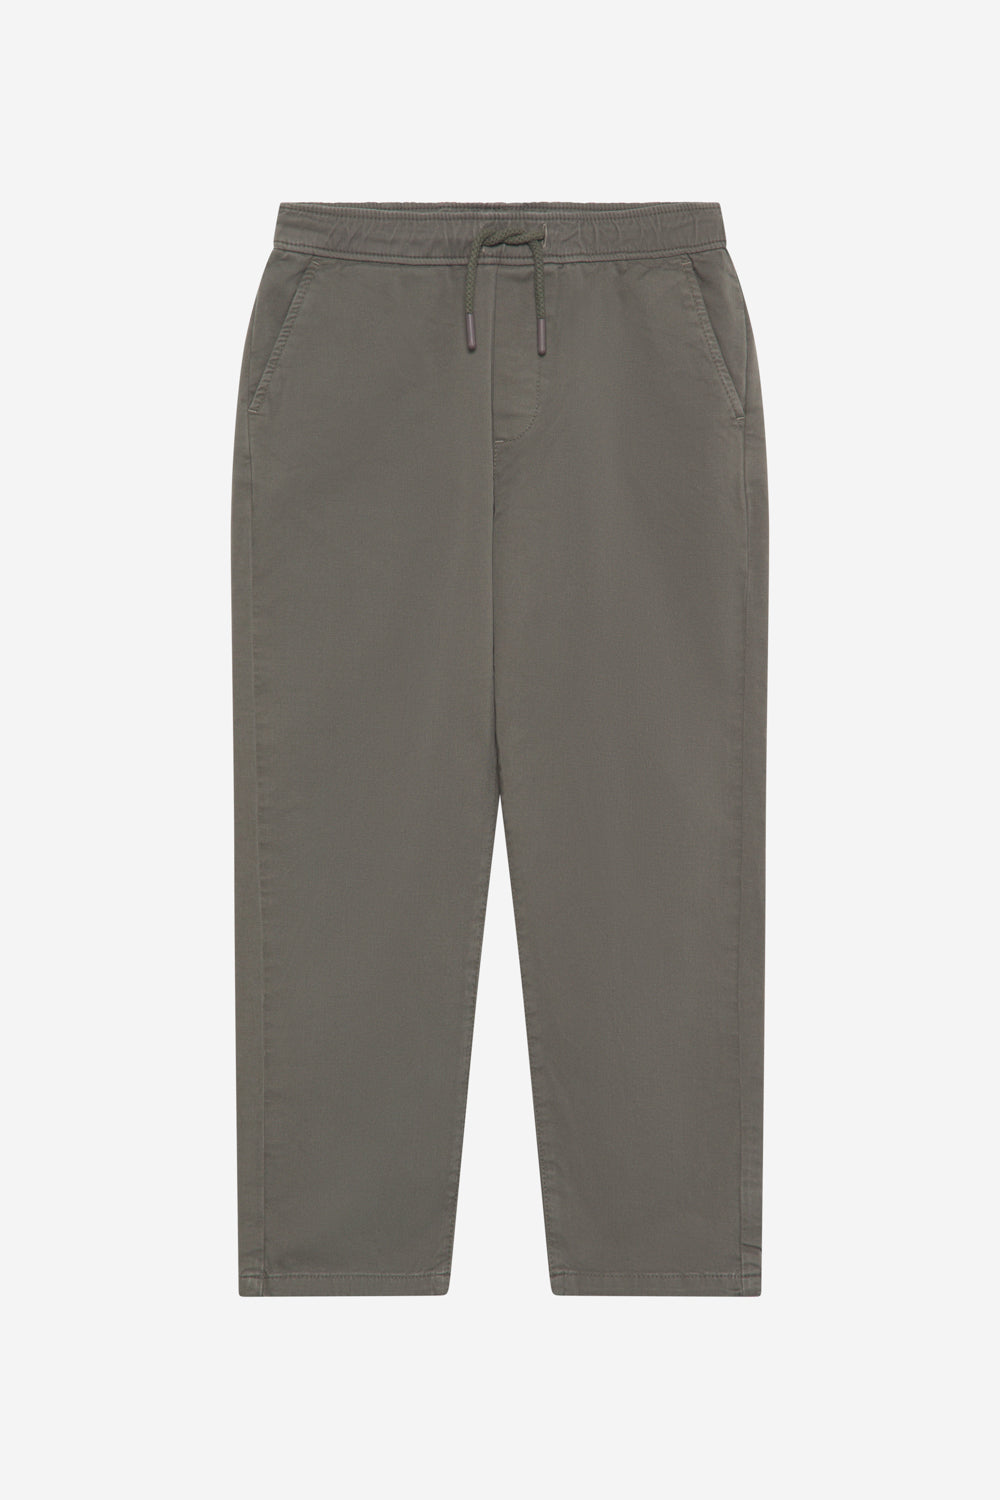 OLIVE CHINO TROUSERS